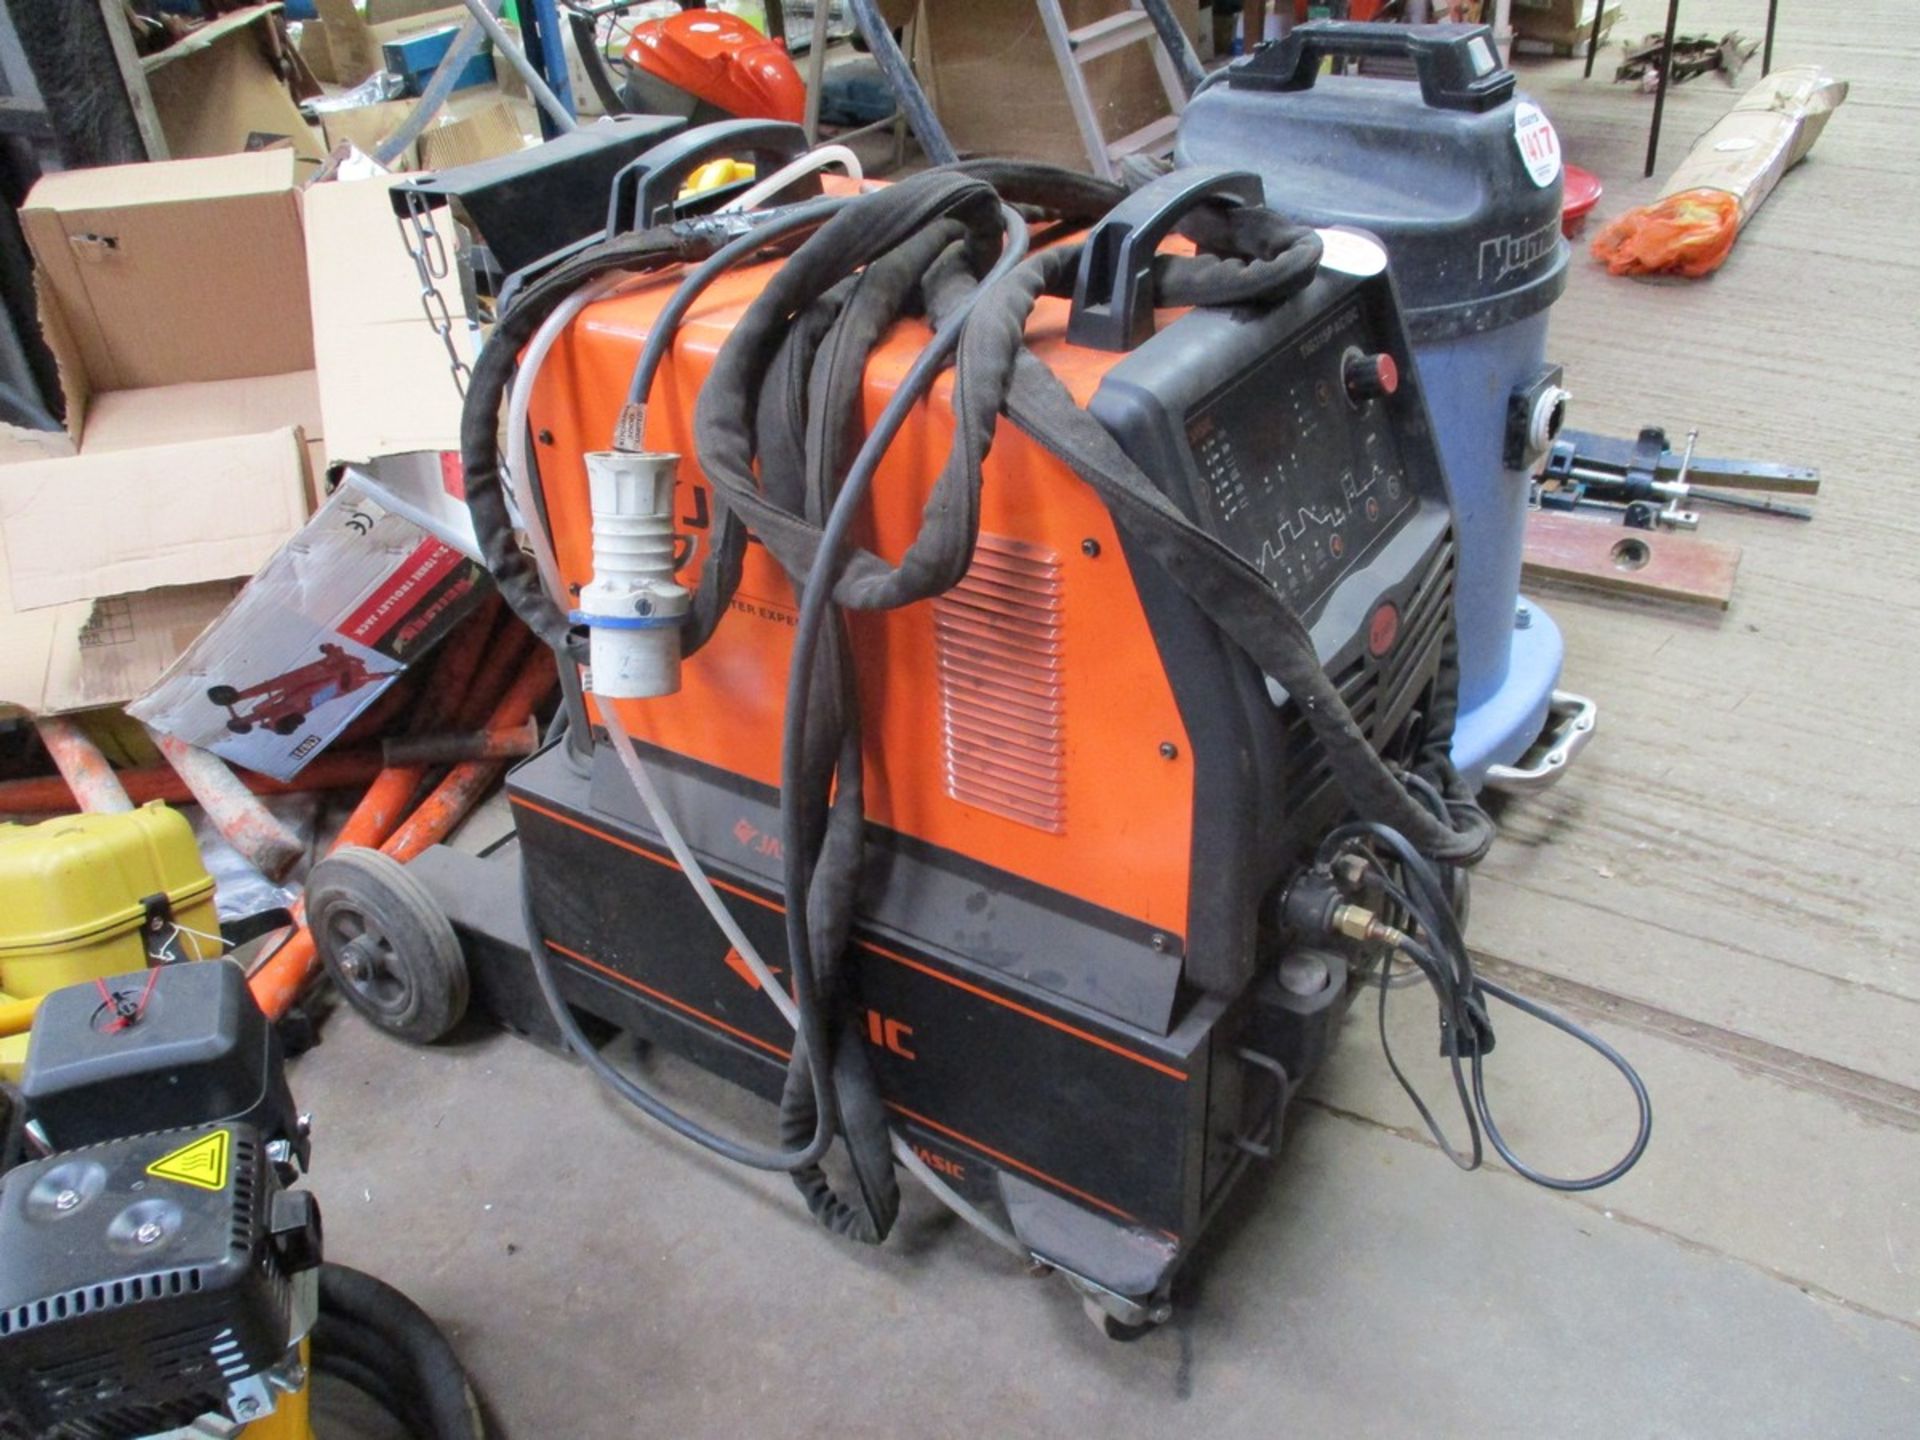 JASK AC/DC WATER COOLED WELDER